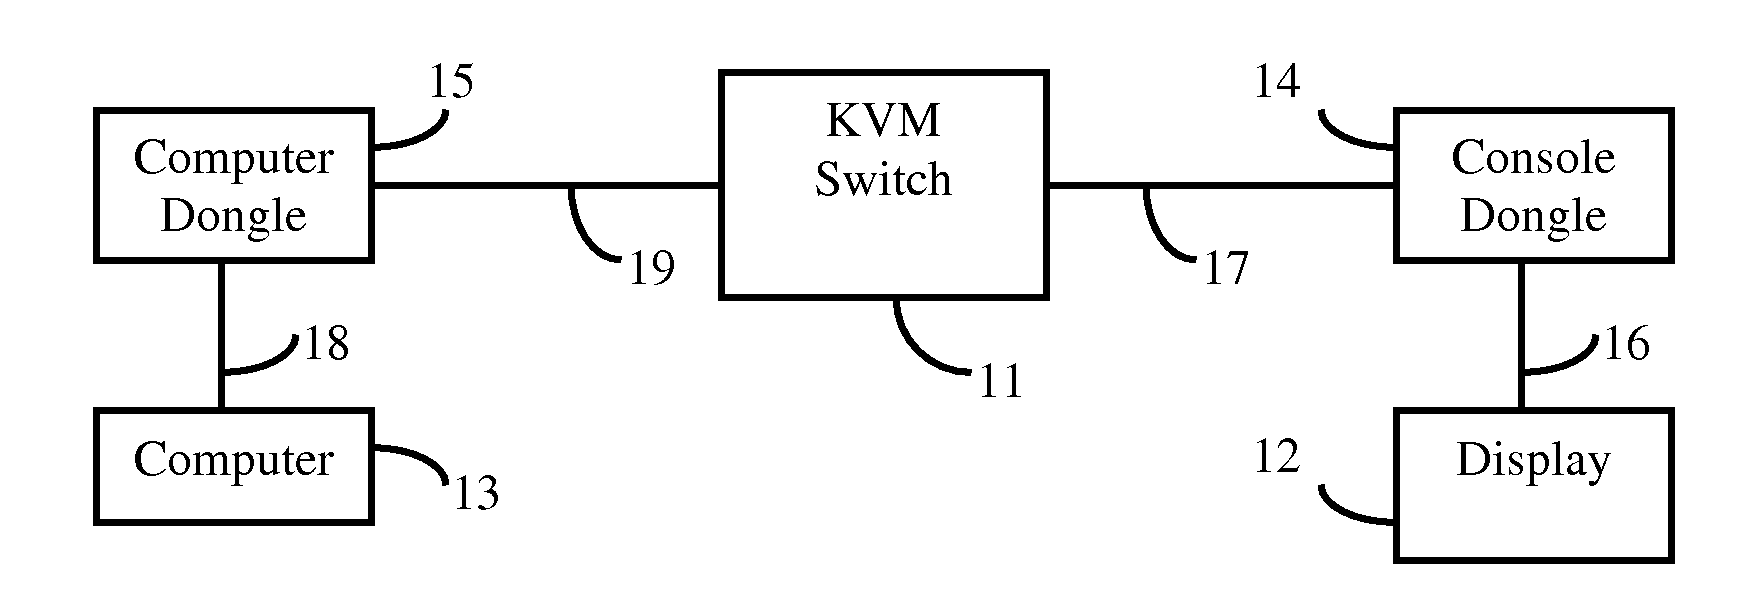 Video extender devices capable of providing edid of a display to a computer